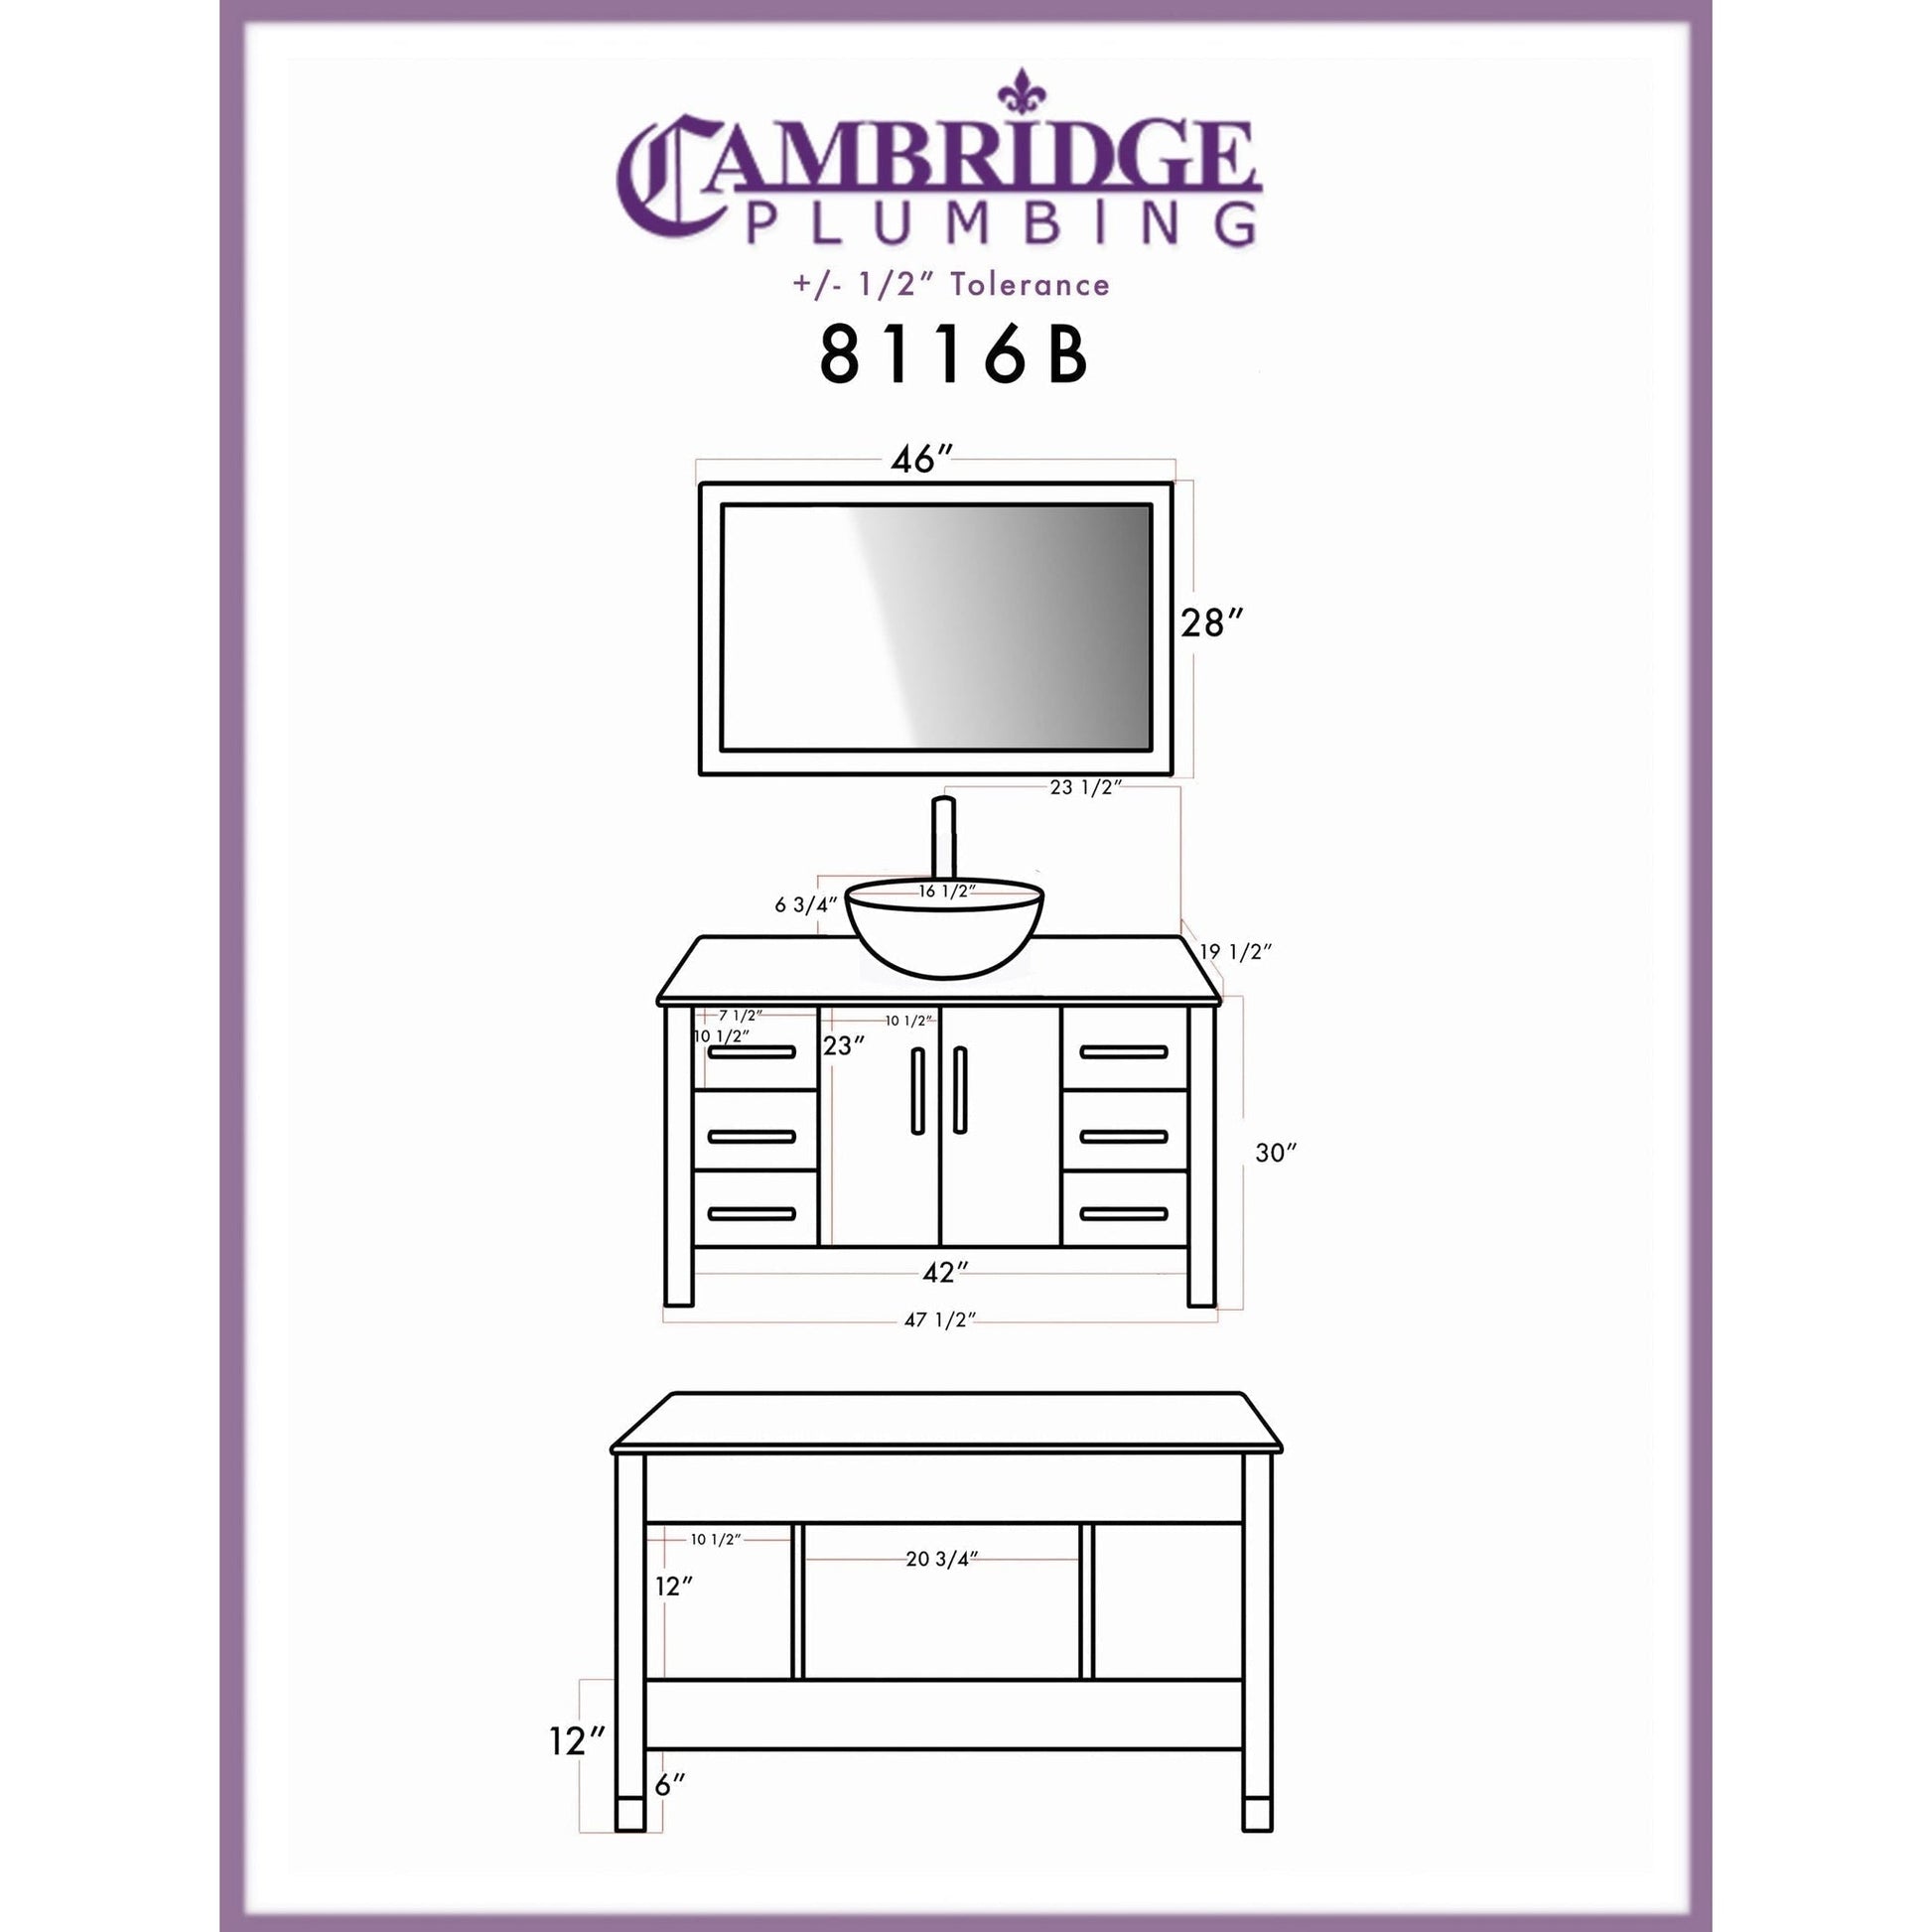 Cambridge Plumbing 48" White Wood Single Vanity Set With Tempered Glass Countertop And Circular Vessel Sink With Brushed Nickel Plumbing Finish